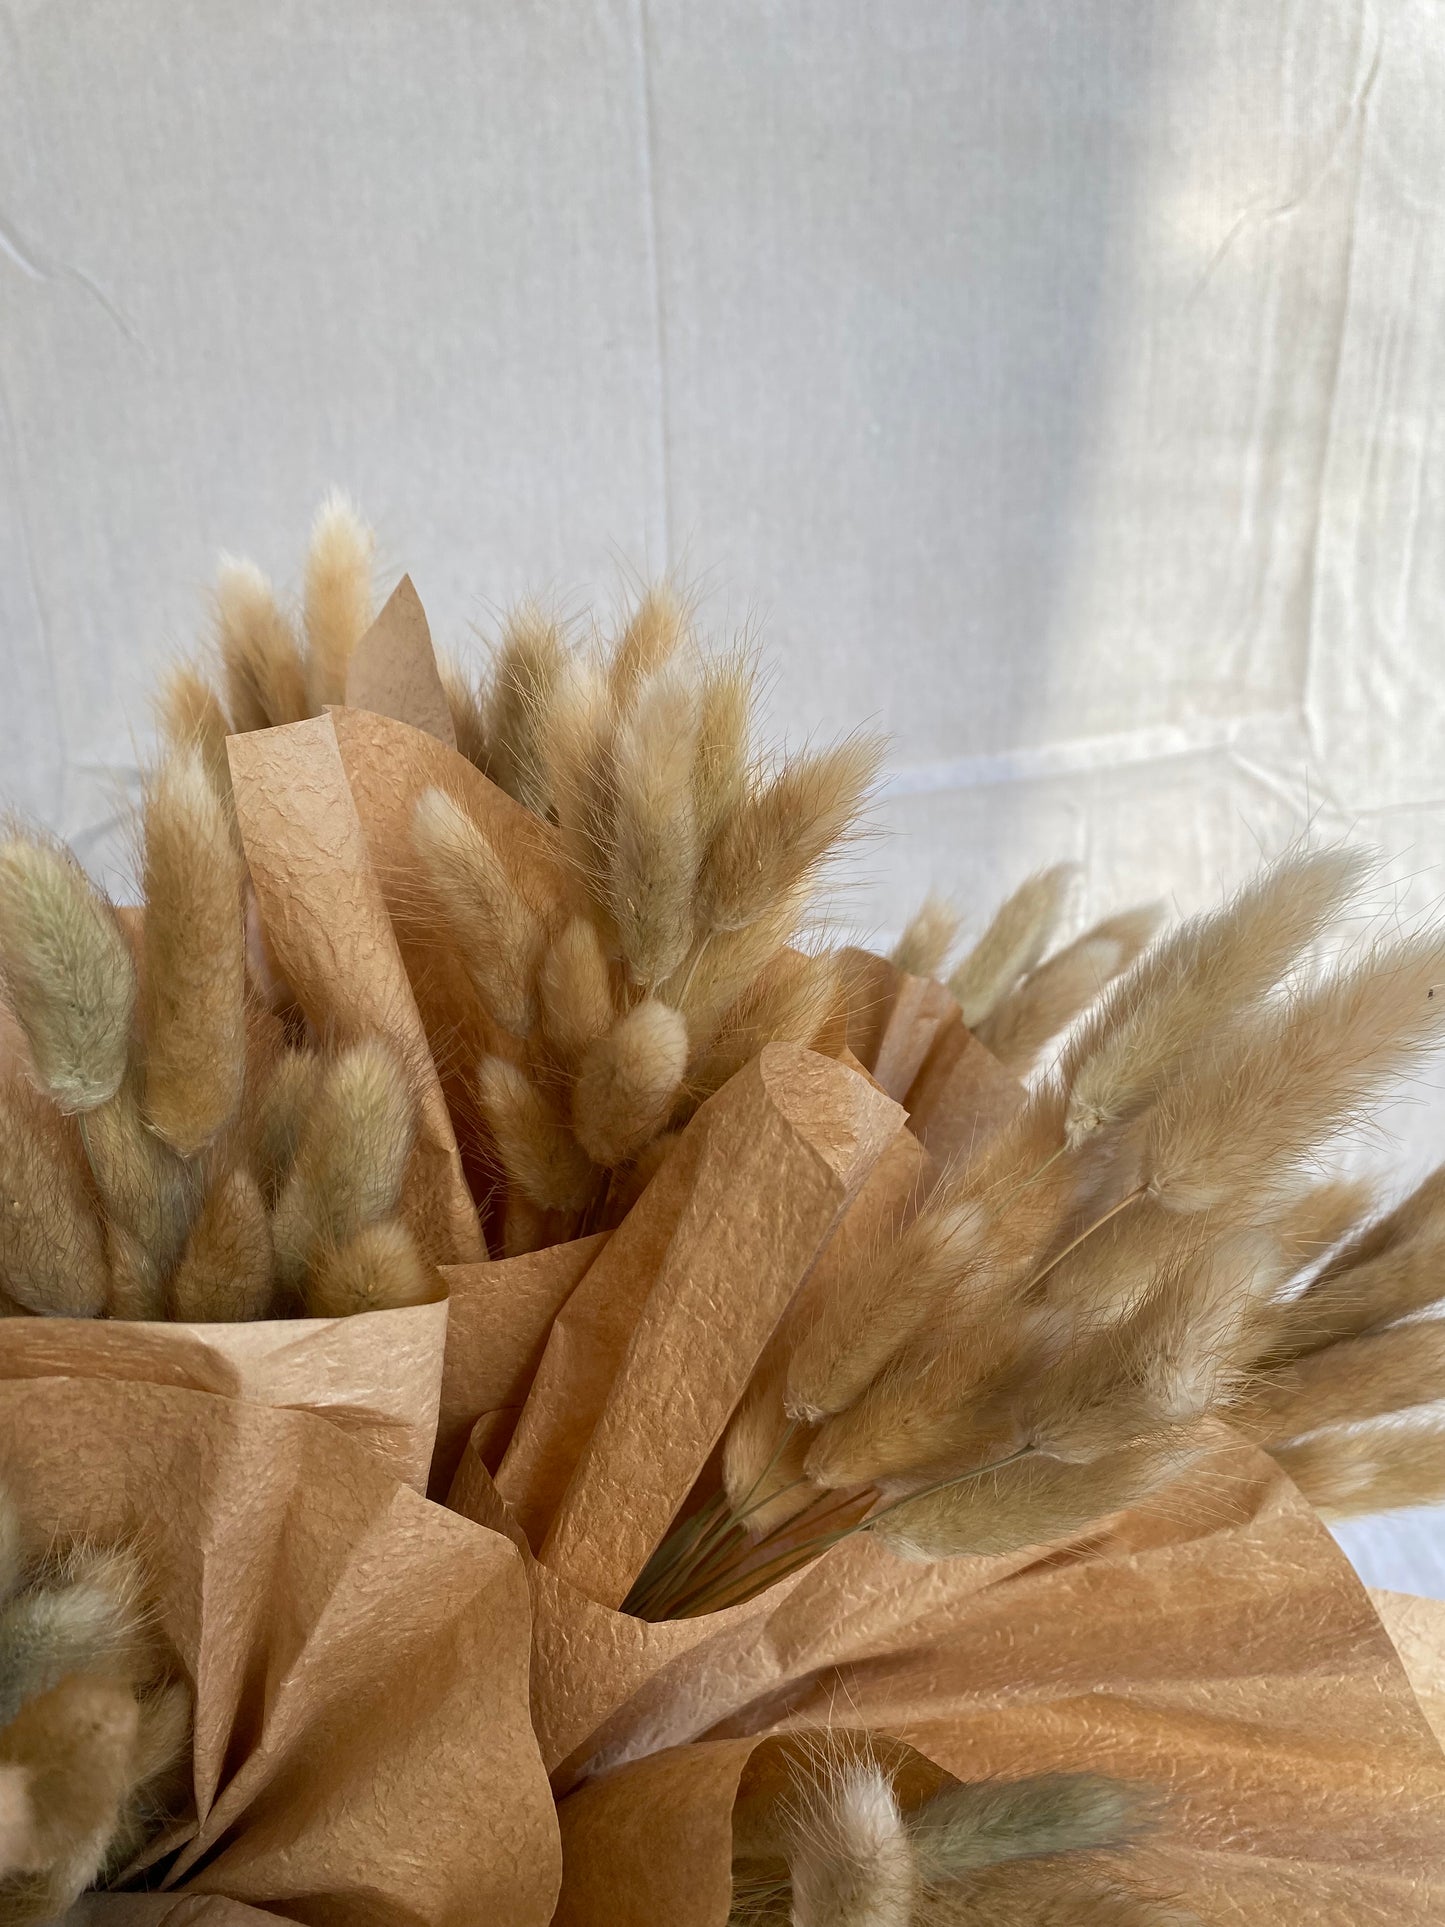 Bunny tails dried flowers